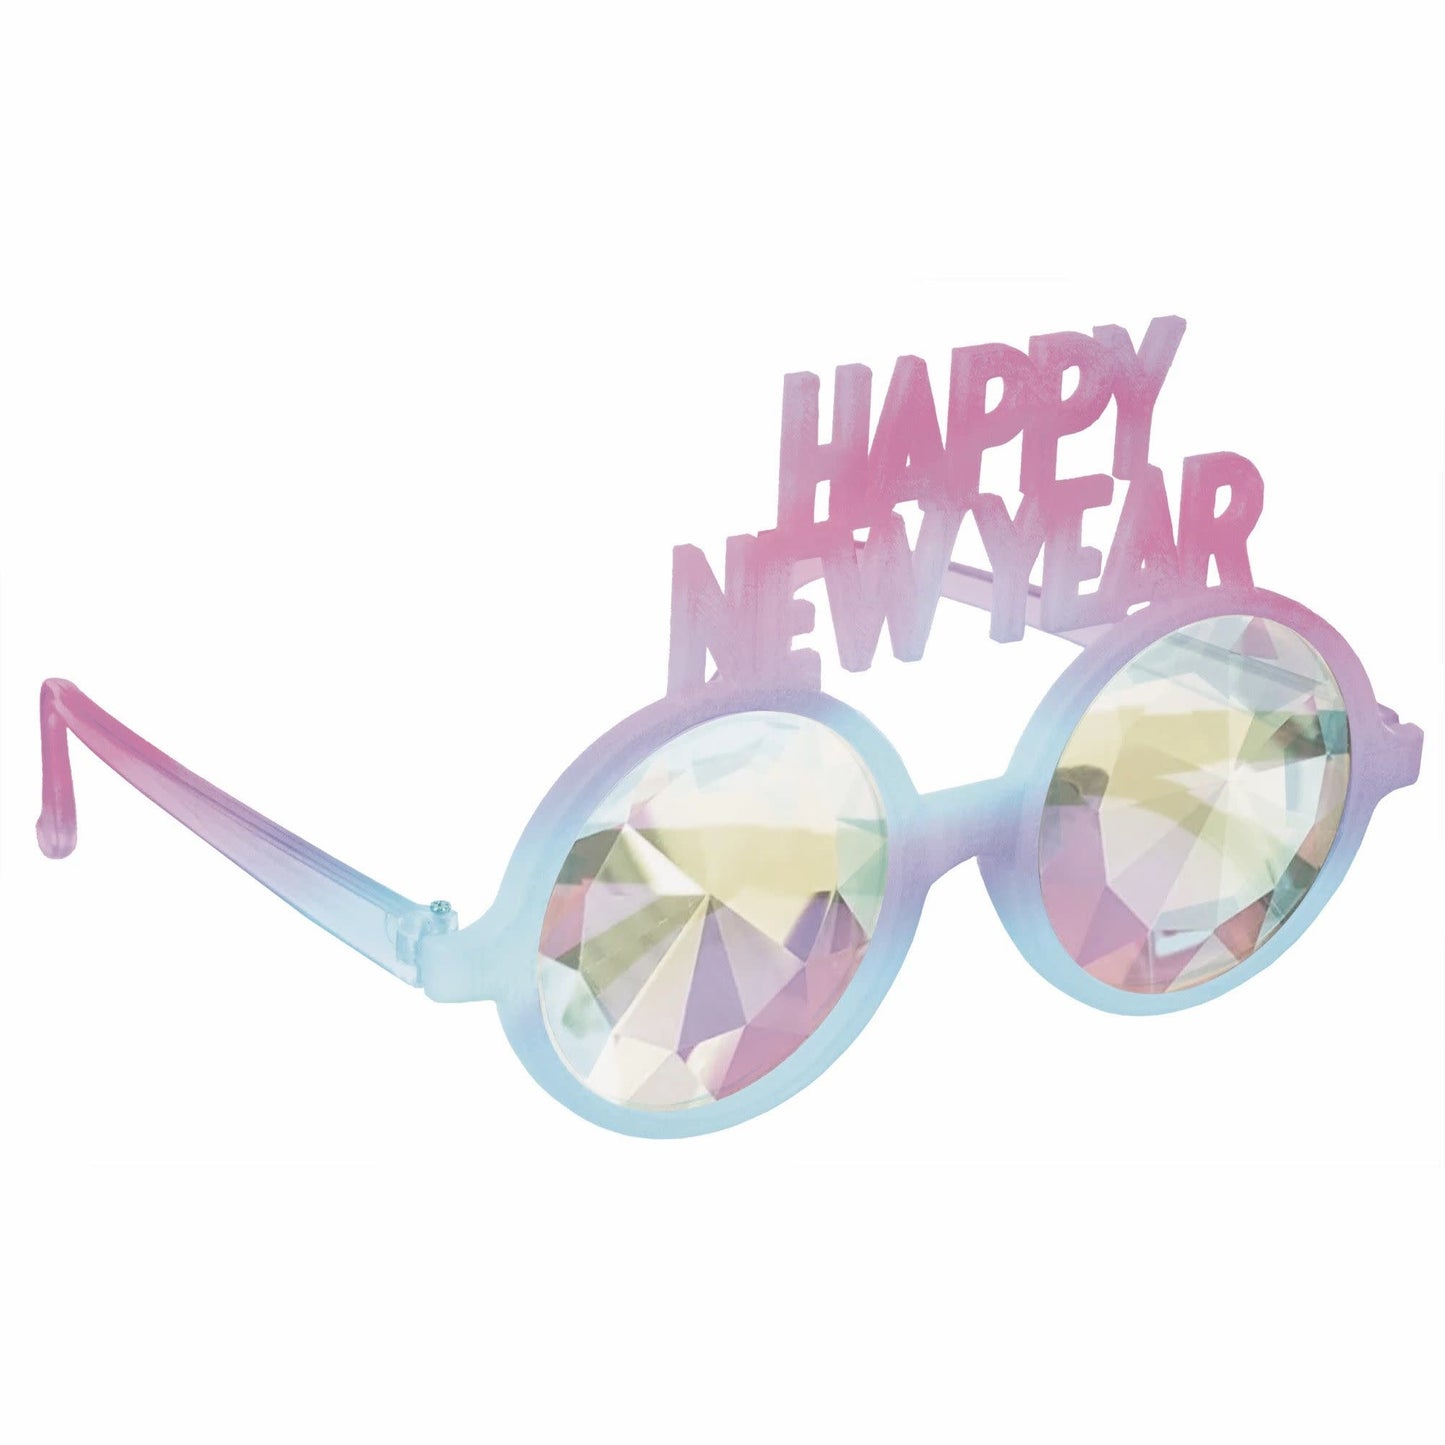 "Happy New Year" Faceted Glasses